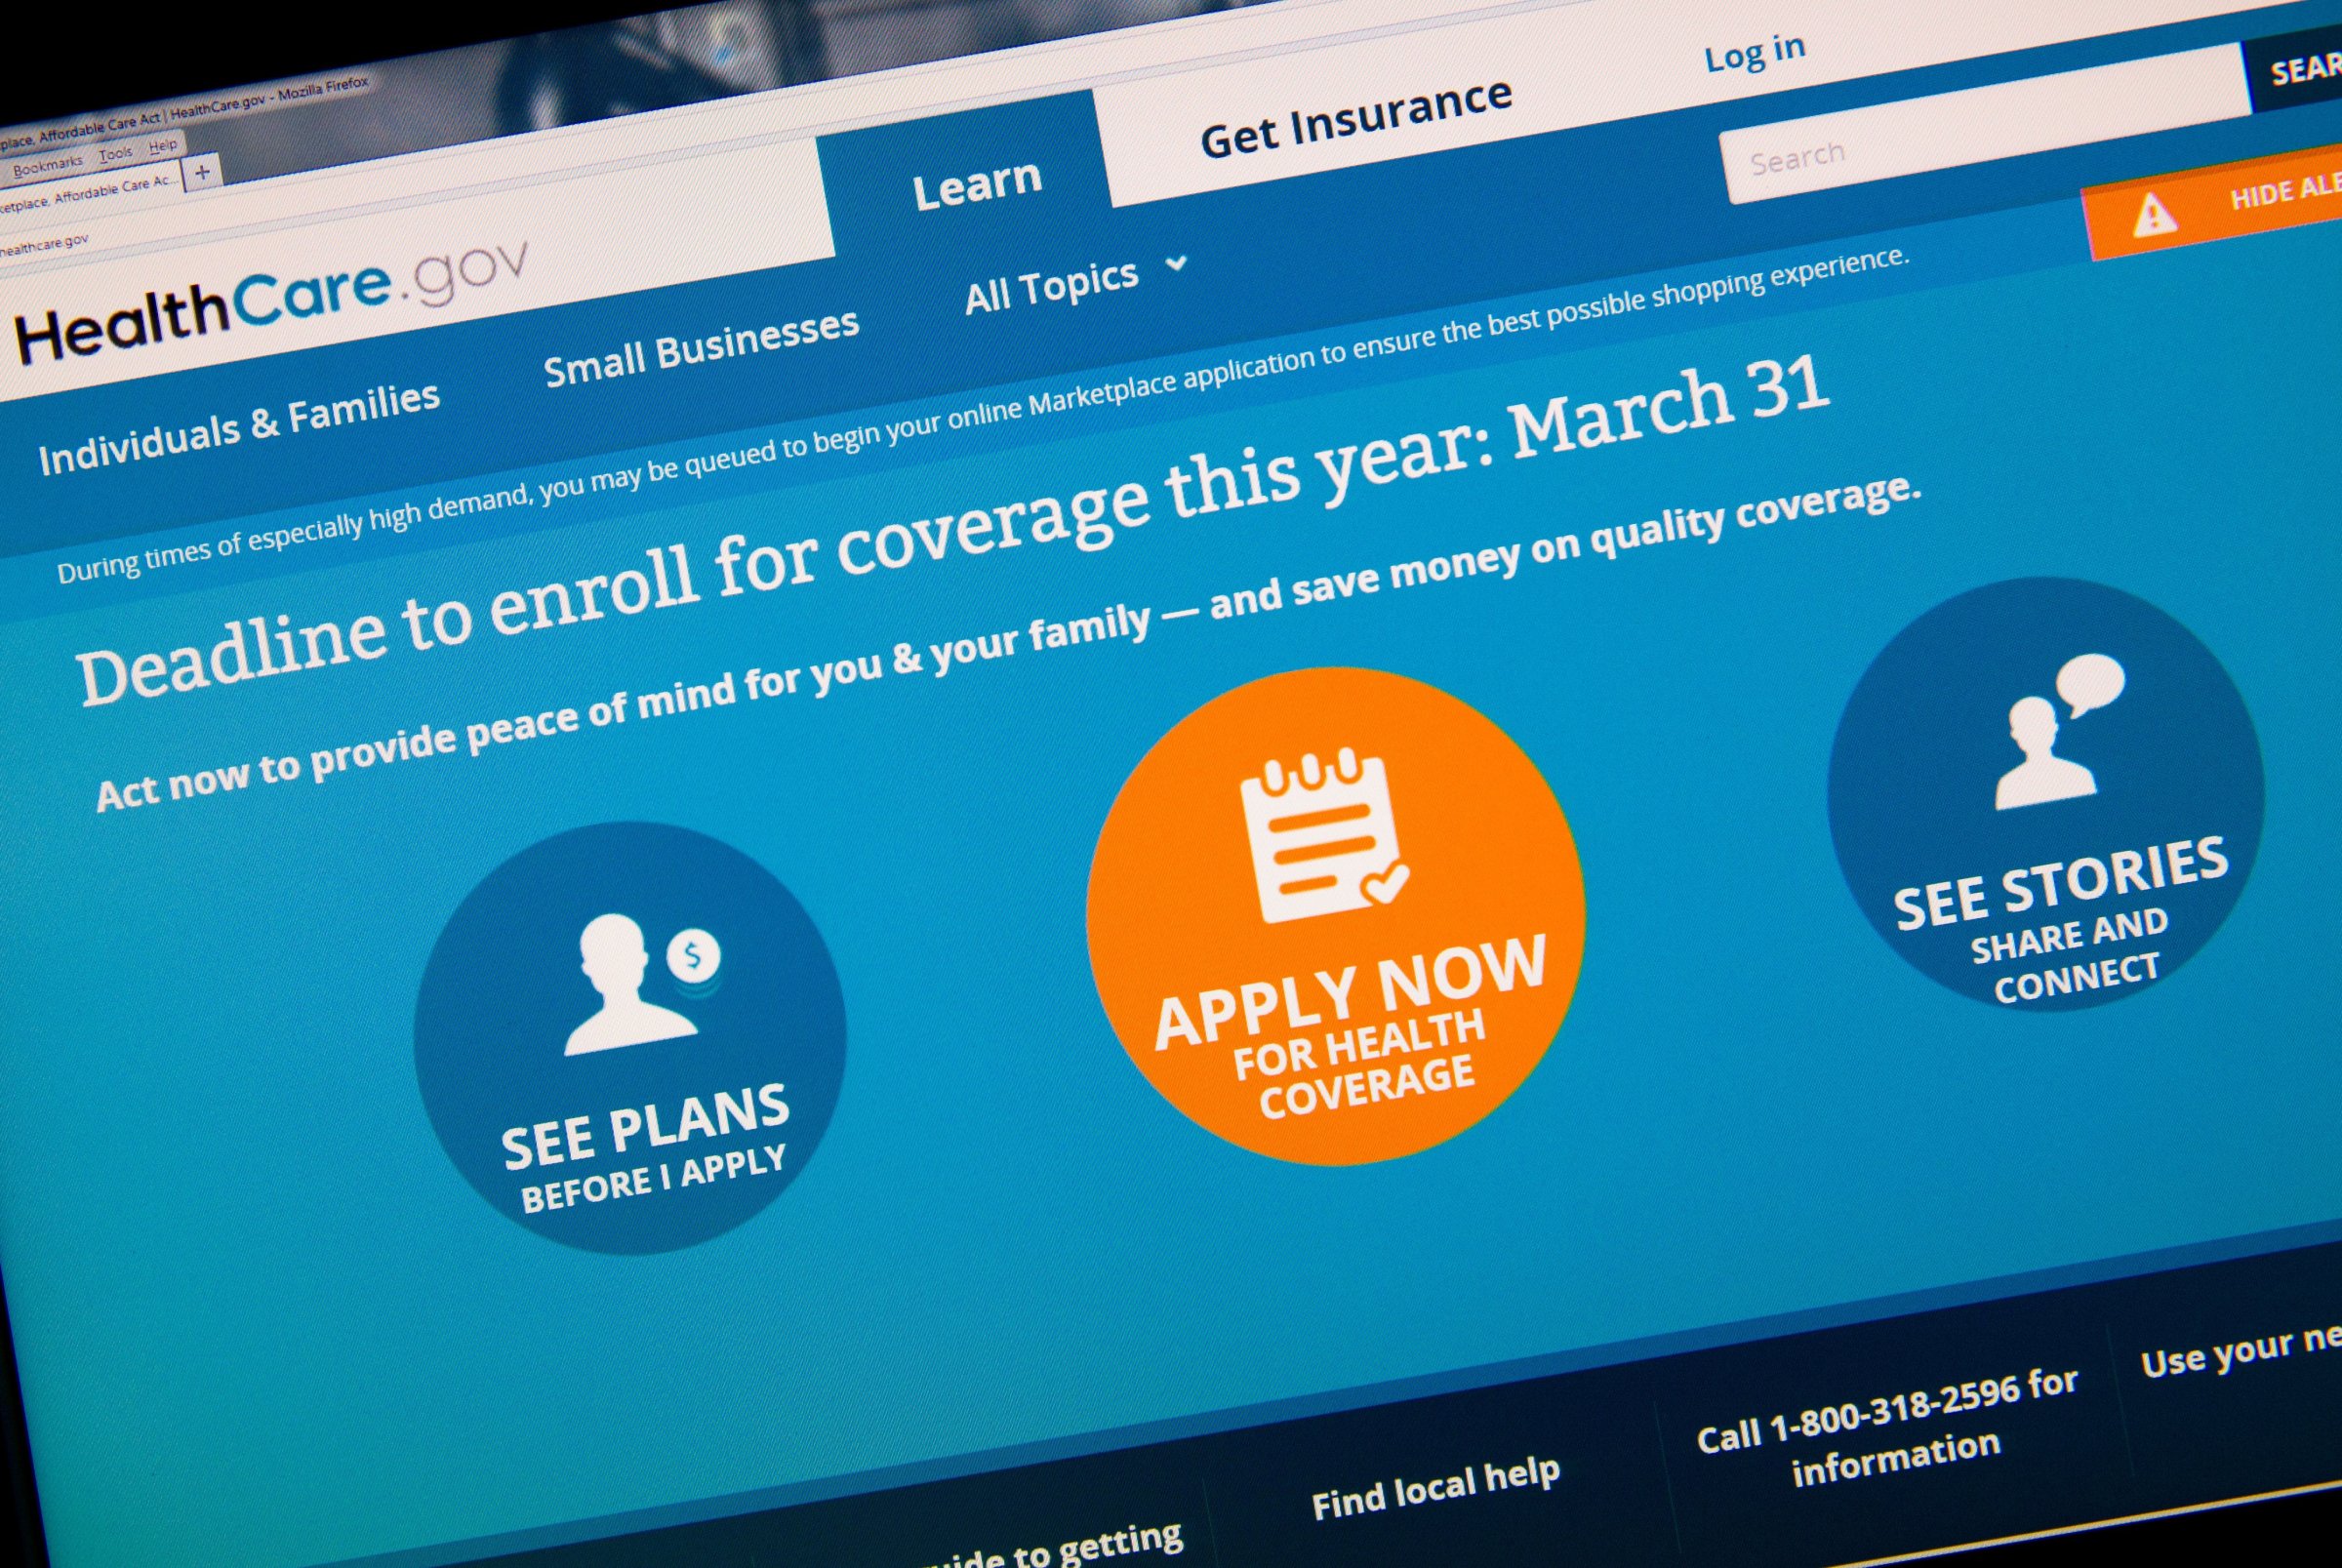 The home page for the HealthCare.gov on March 31, 2014 in Washington, D.C.